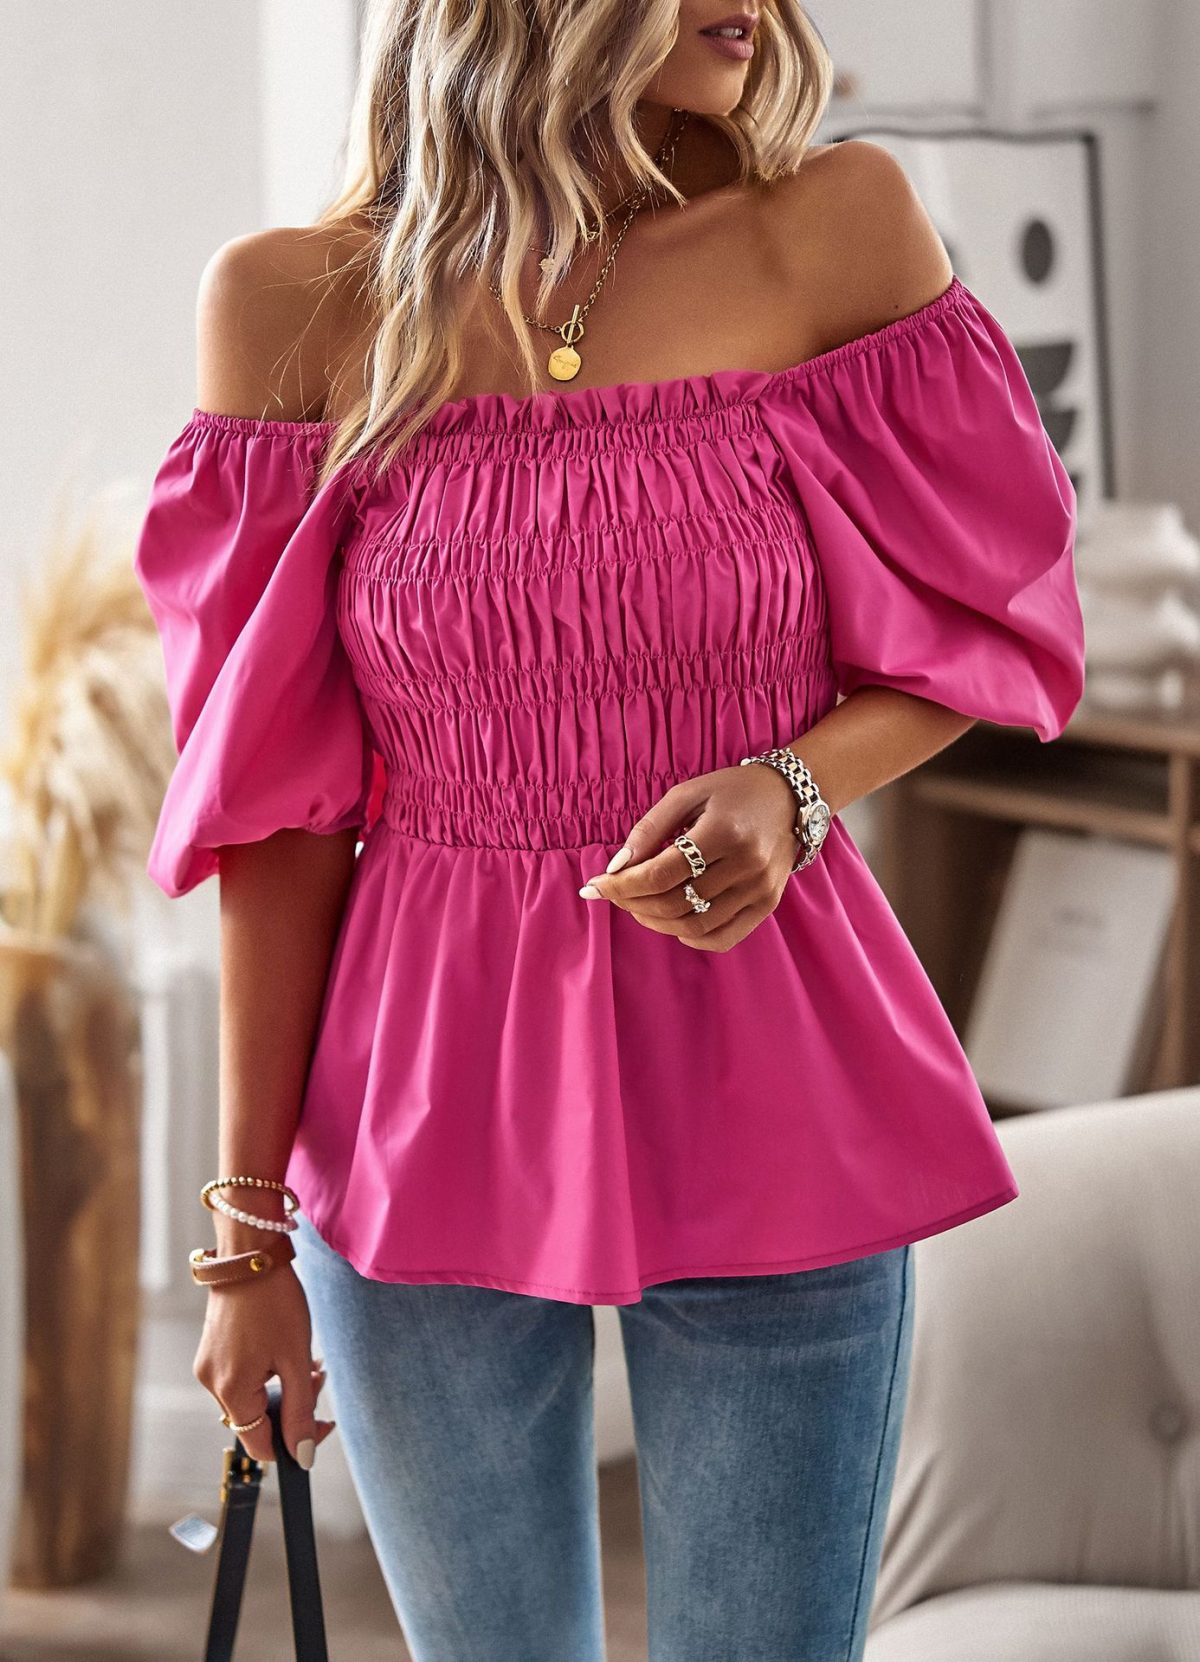 Waist Tight Slimming French Square Collar Top in Blouses & Shirts